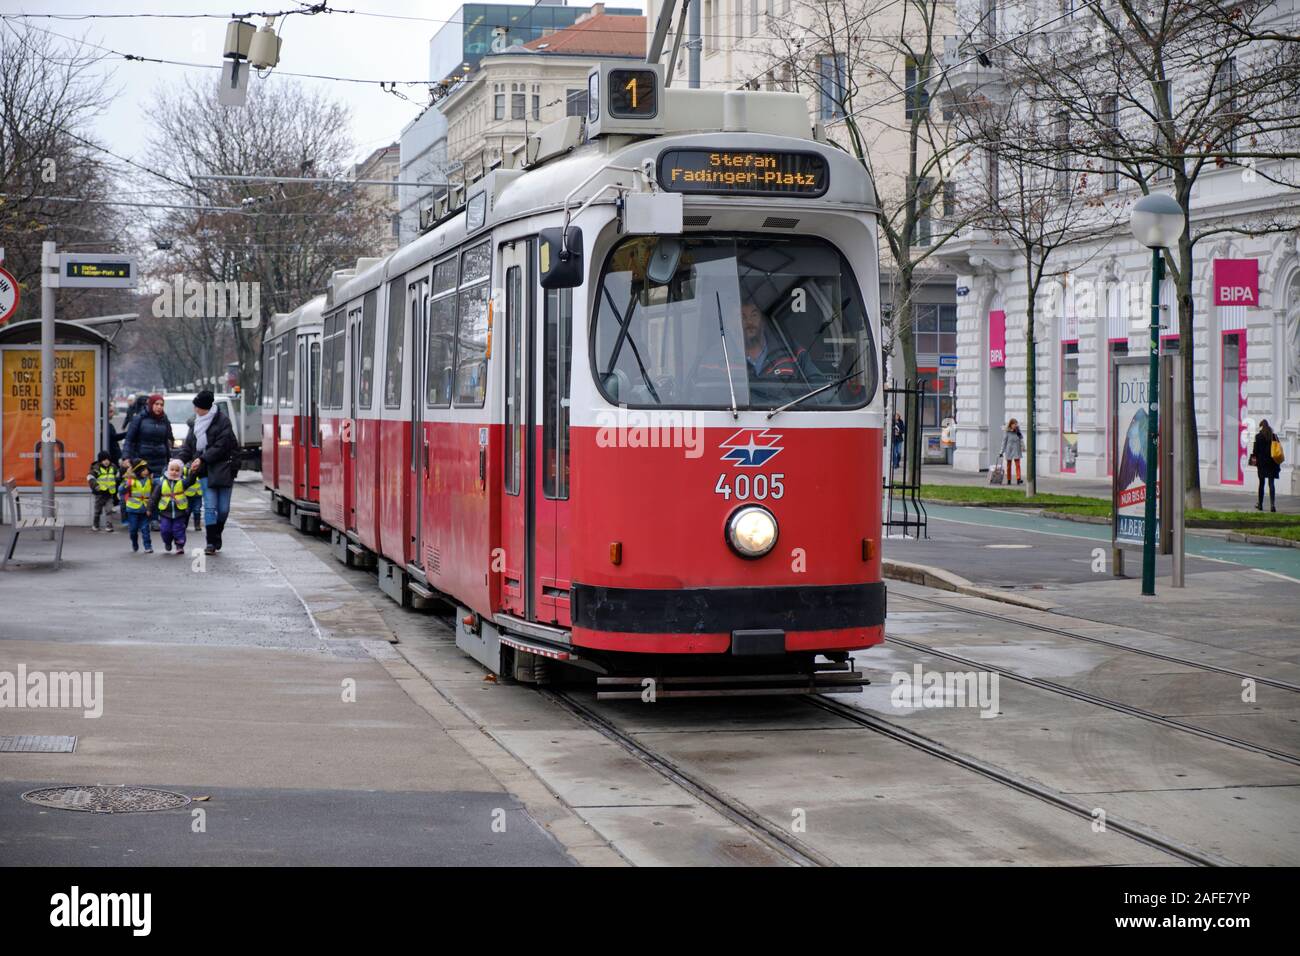 E2 type Vienna Tram at stop with driver in on school group rushing to catch it Stock Photo